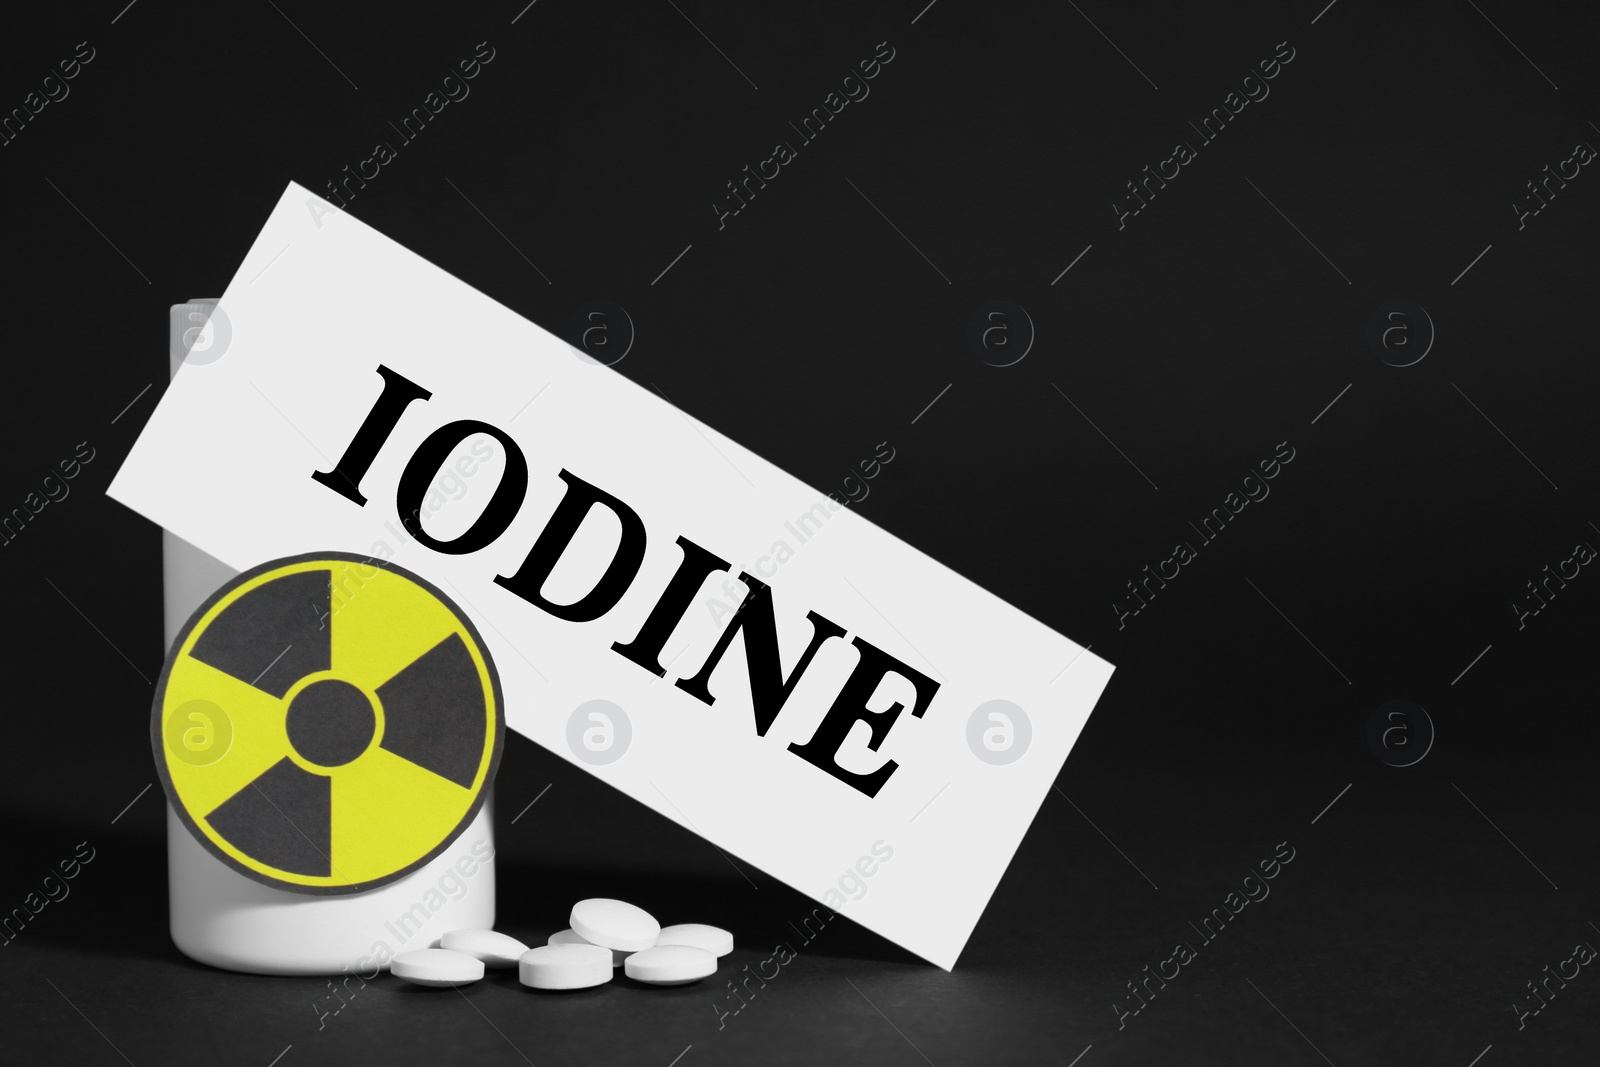 Photo of Paper note with word Iodine, bottle, pills and radiation sign on black background. Space for text